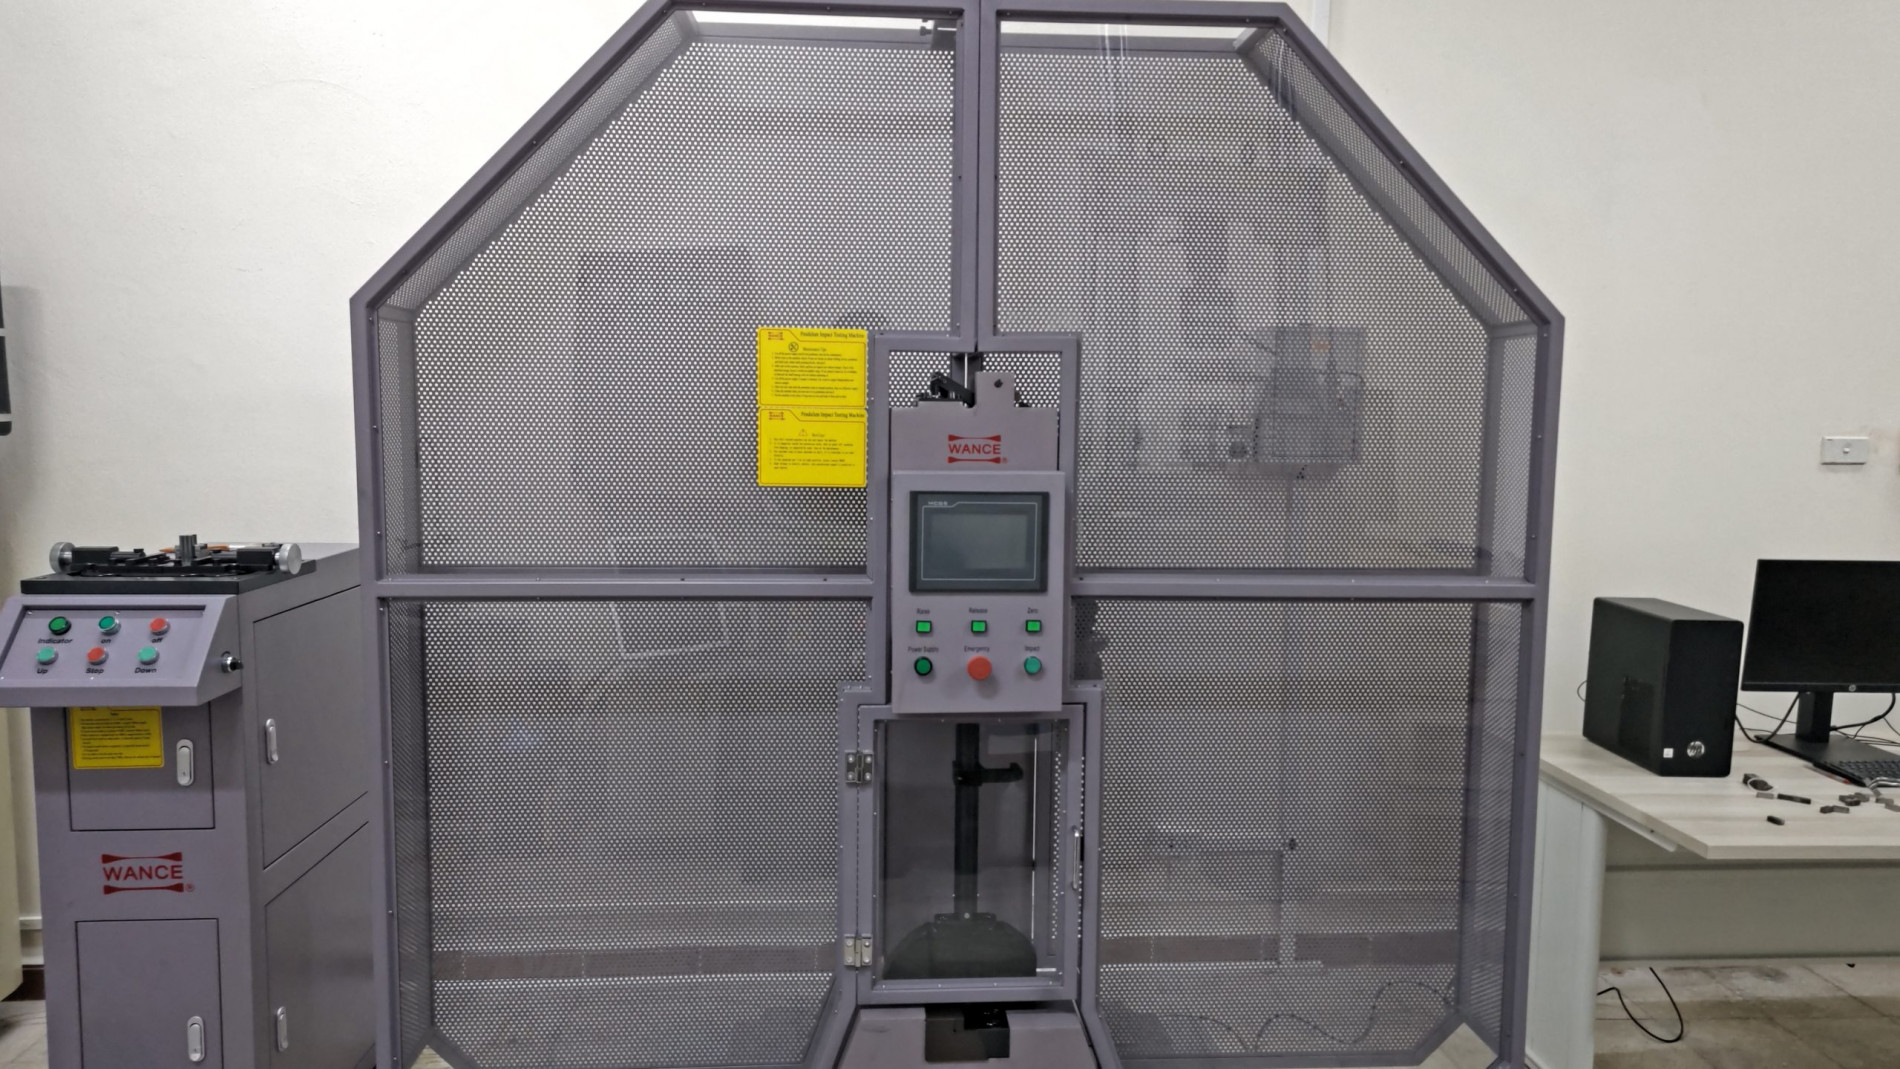 15 Charpy impact tester Wance PIT452